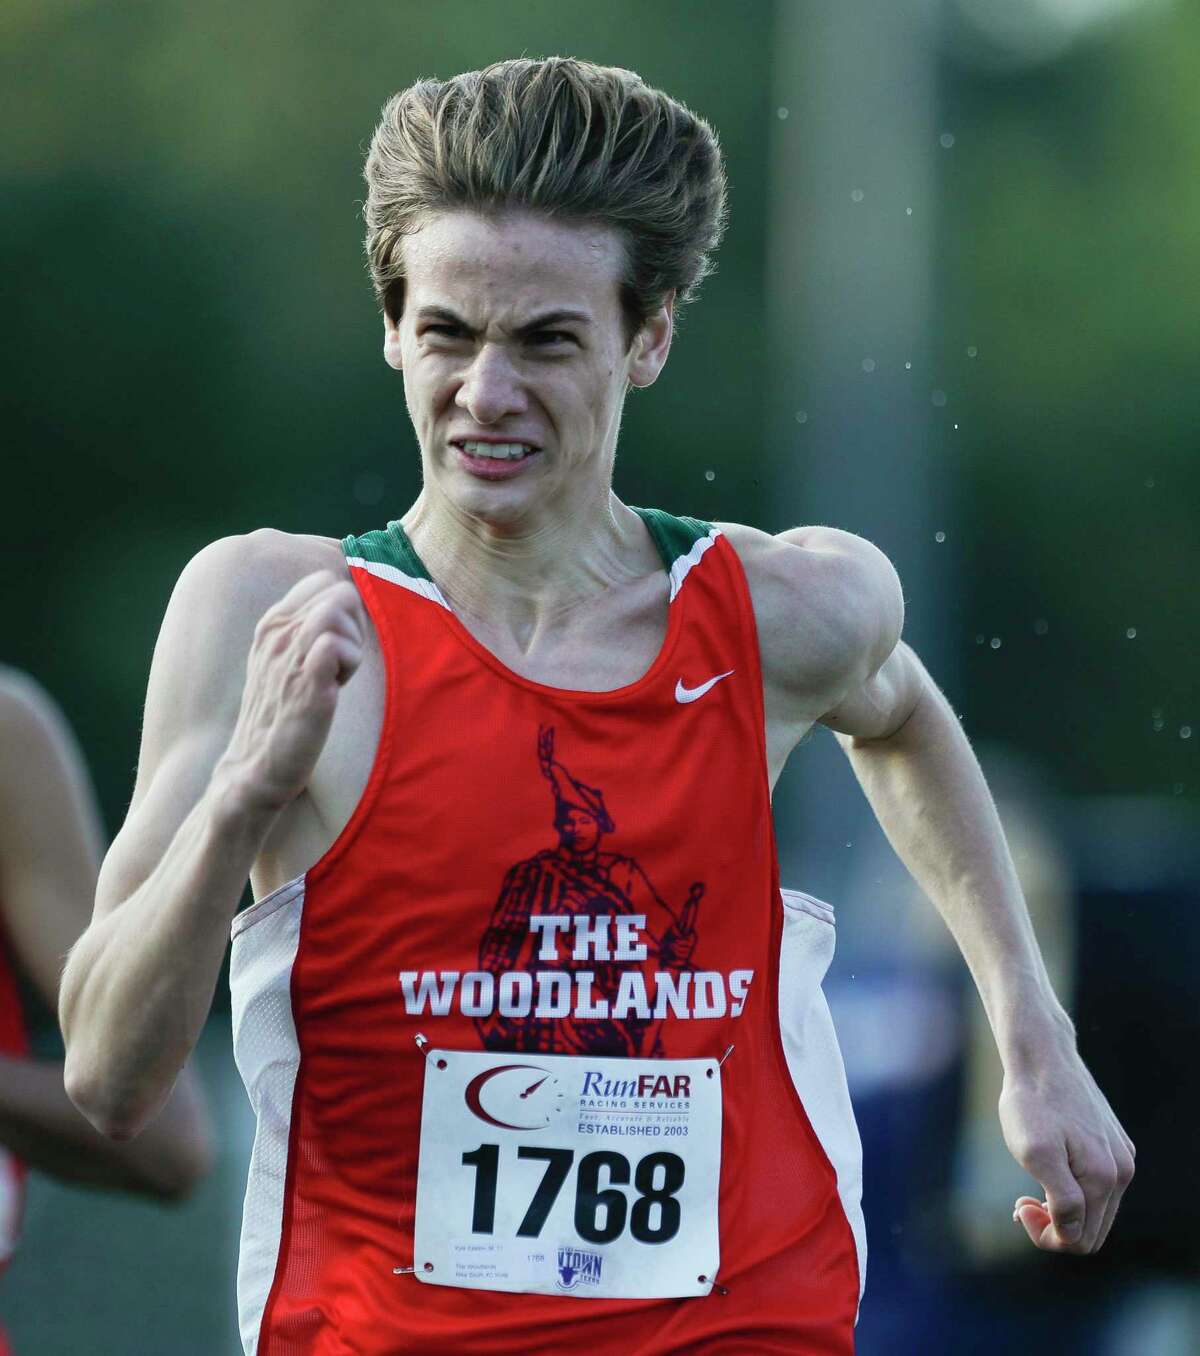 The Woodlands nets elite win at Nike South meet